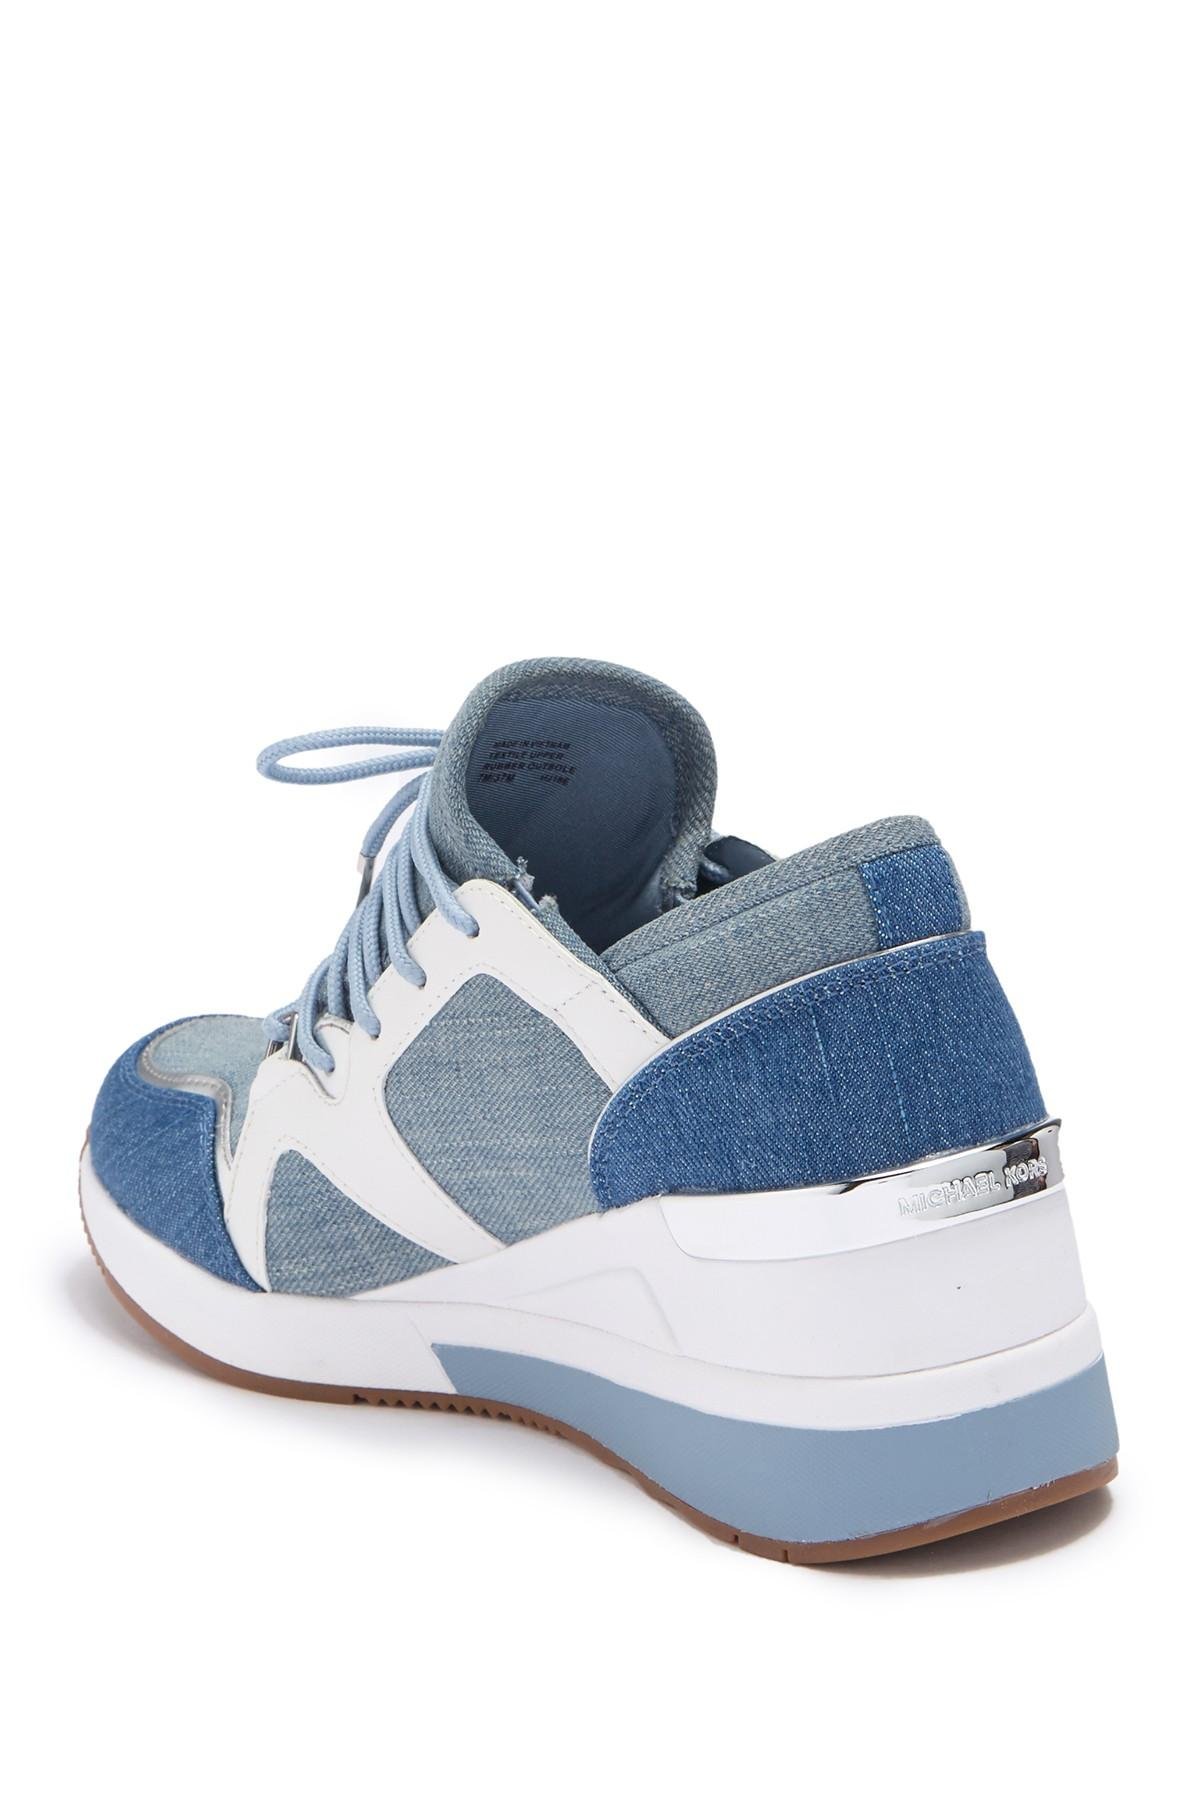 Total 51+ imagen michael kors blue and white sneakers - Abzlocal.mx